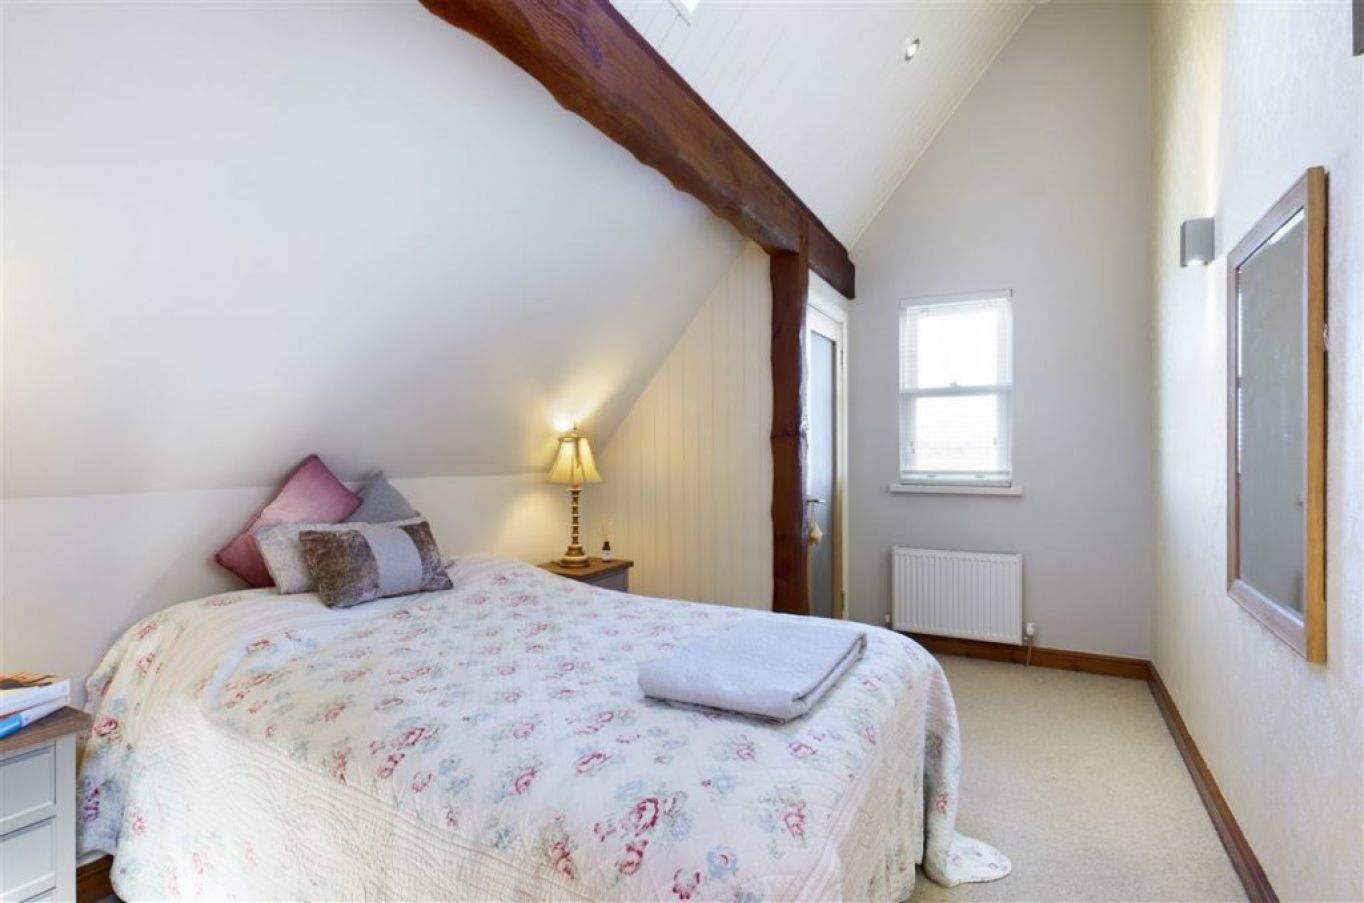 Upstairs Are Four Of The House’s Five Bedrooms. Photo: Courtesy Of Re/Max Property Specialists.